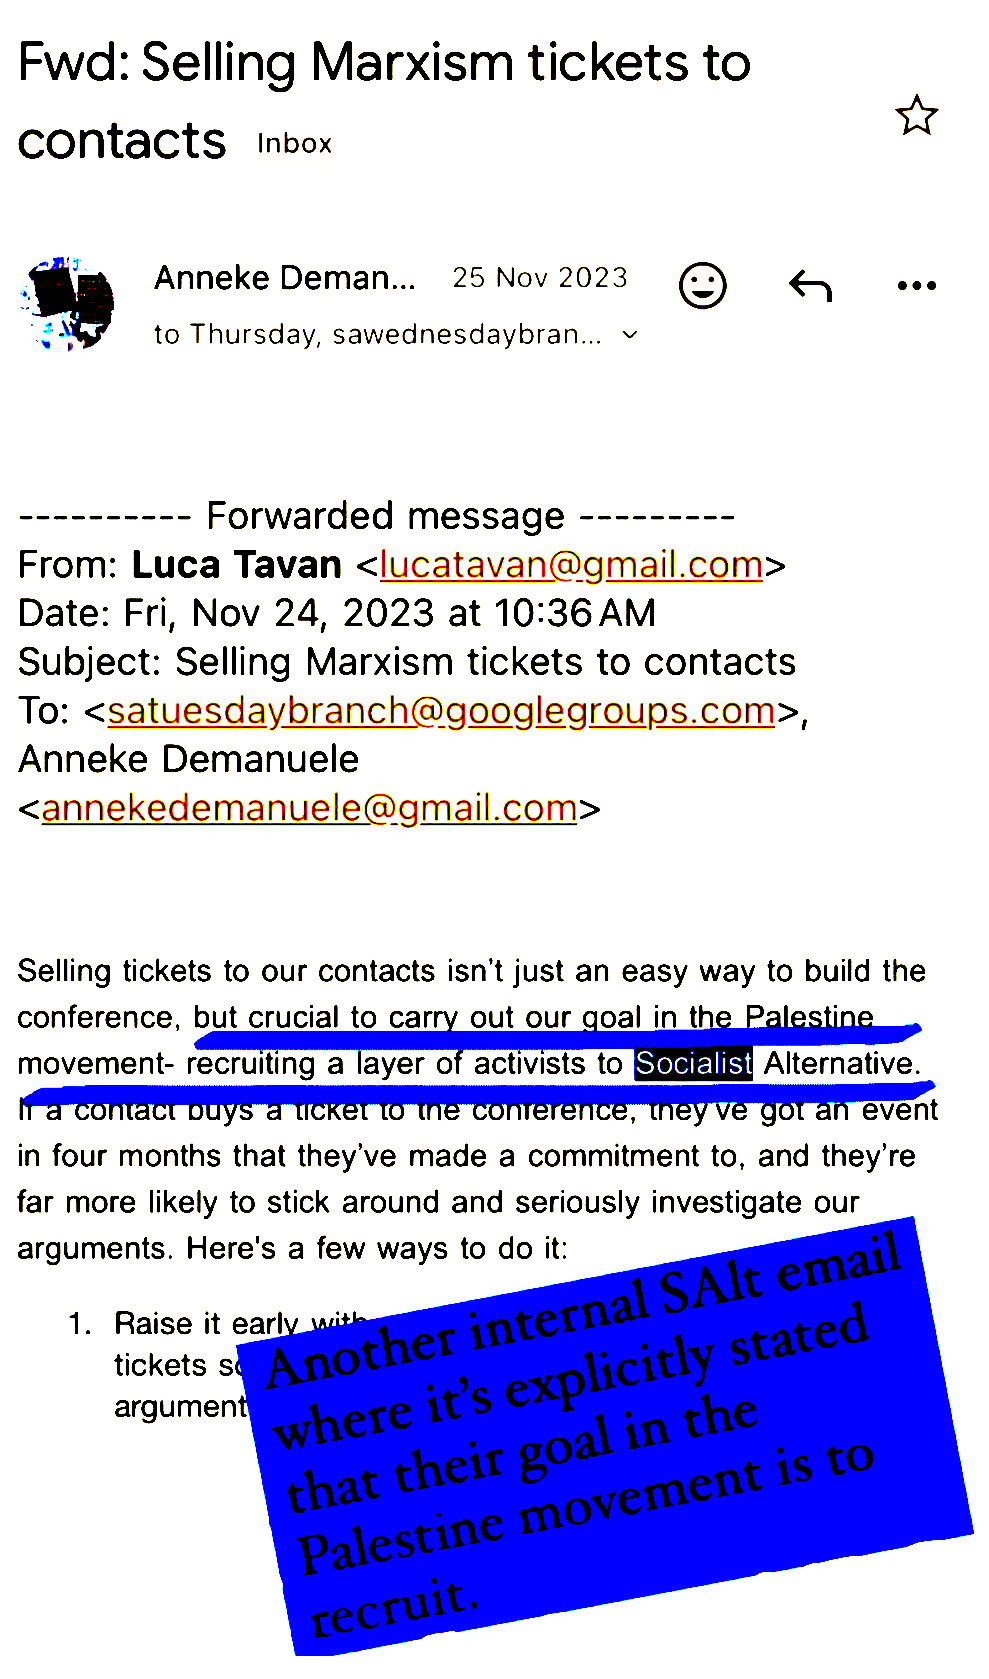 Fwd: Selling Marxism tickets to Contacts

Anneke Deman... 25 Nov 2023 

---------- Forwarded message ---------
From: Luca Tavan <|ucatavan@gmail.com>
Date: Fri, Nov 24, 2023 at 10:36 AM
Subject: Selling Marxism tickets to contacts
To: <satuesdaybranch@googlegroups.com>,
Anneke Demanuele
<annekedemanuele@gmail.com>

Selling tickets to our contacts isn't just an easy way to build the
conference, but crucial to carry out our goal in the palestine 
movement- recruiting a layer of activists to Socialist Alternative.
If a contact buys a ticket to the conference, they've got an event
in four months that they've made a commitment to, and they're
far more likely to stick around and seriously investigate our
arguments. Here's a few ways to do it:
1. Raise it early.

There's a caption over the top of the email reading: Another internal SAlt email where it's explicitly stated that their goal in the Palestine movement is to recruit